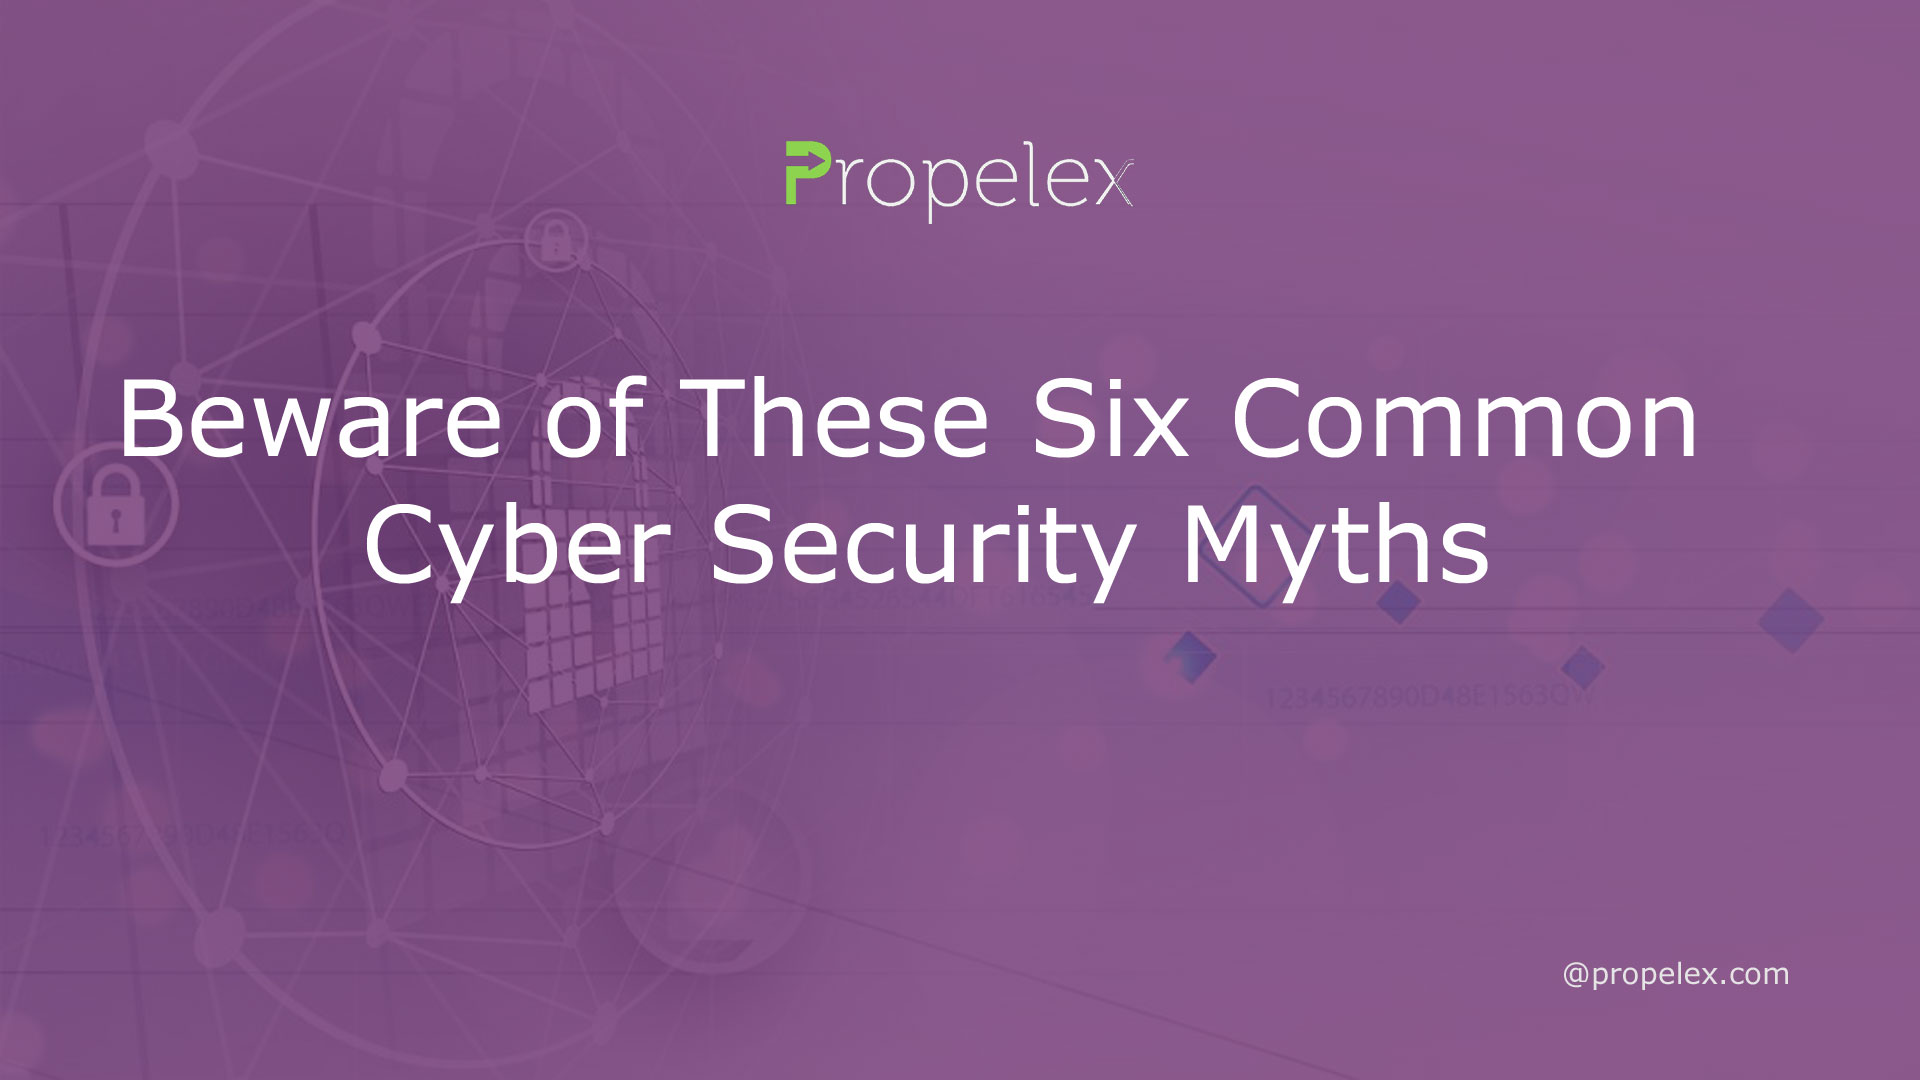 Beware of These Six Common Cyber Security Myths